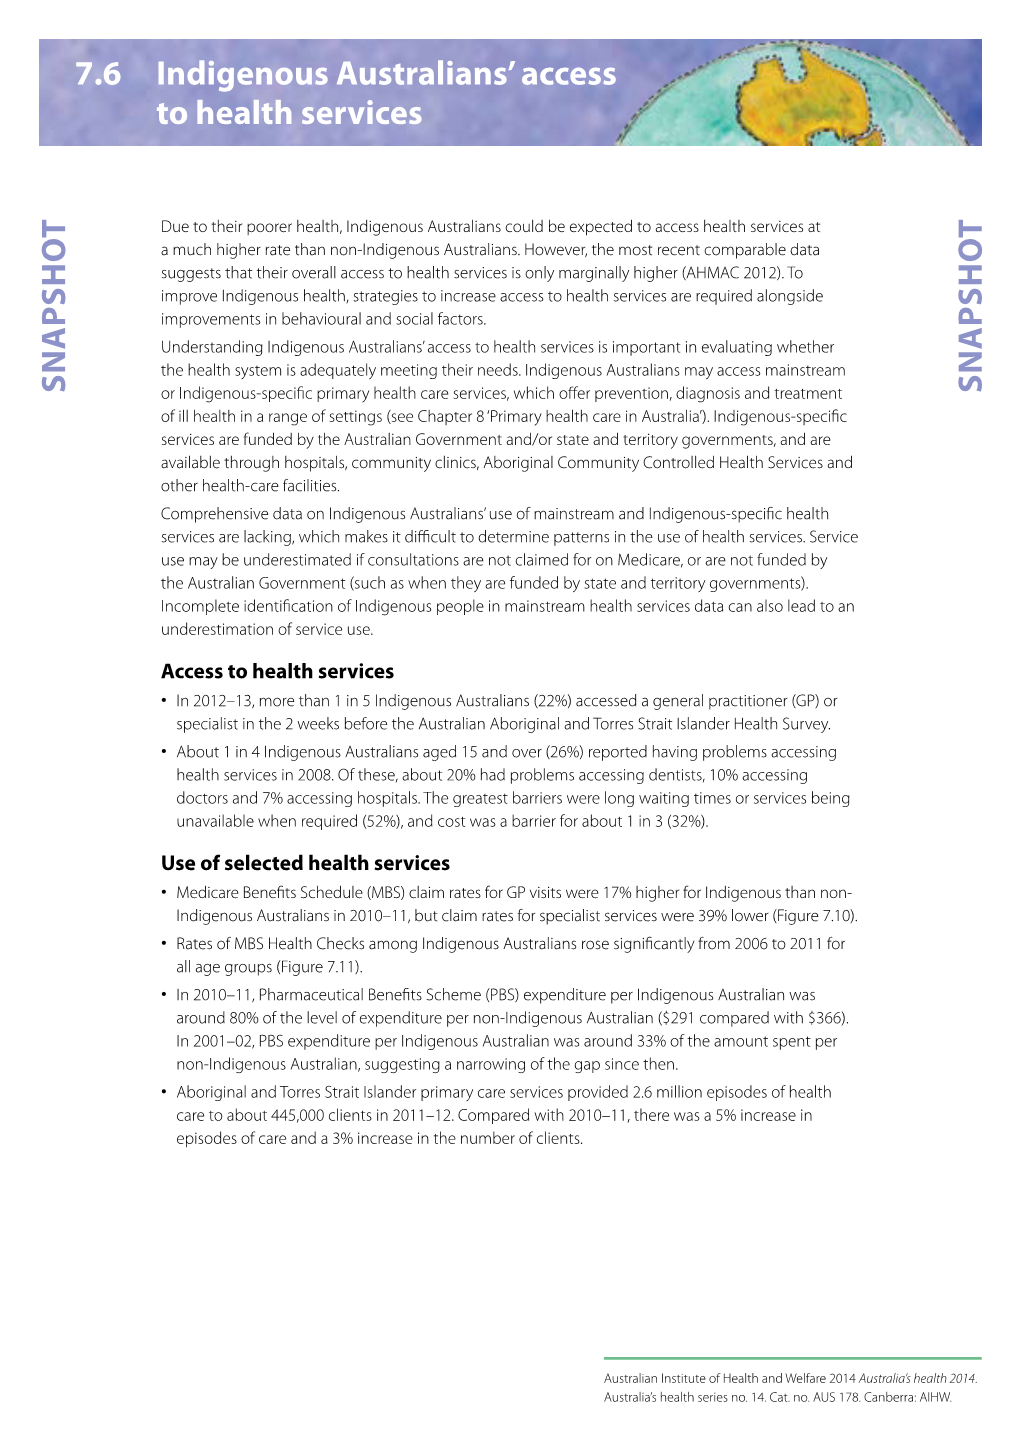 7.6 Indigenous Australians' Access to Health Services (Snapshot)